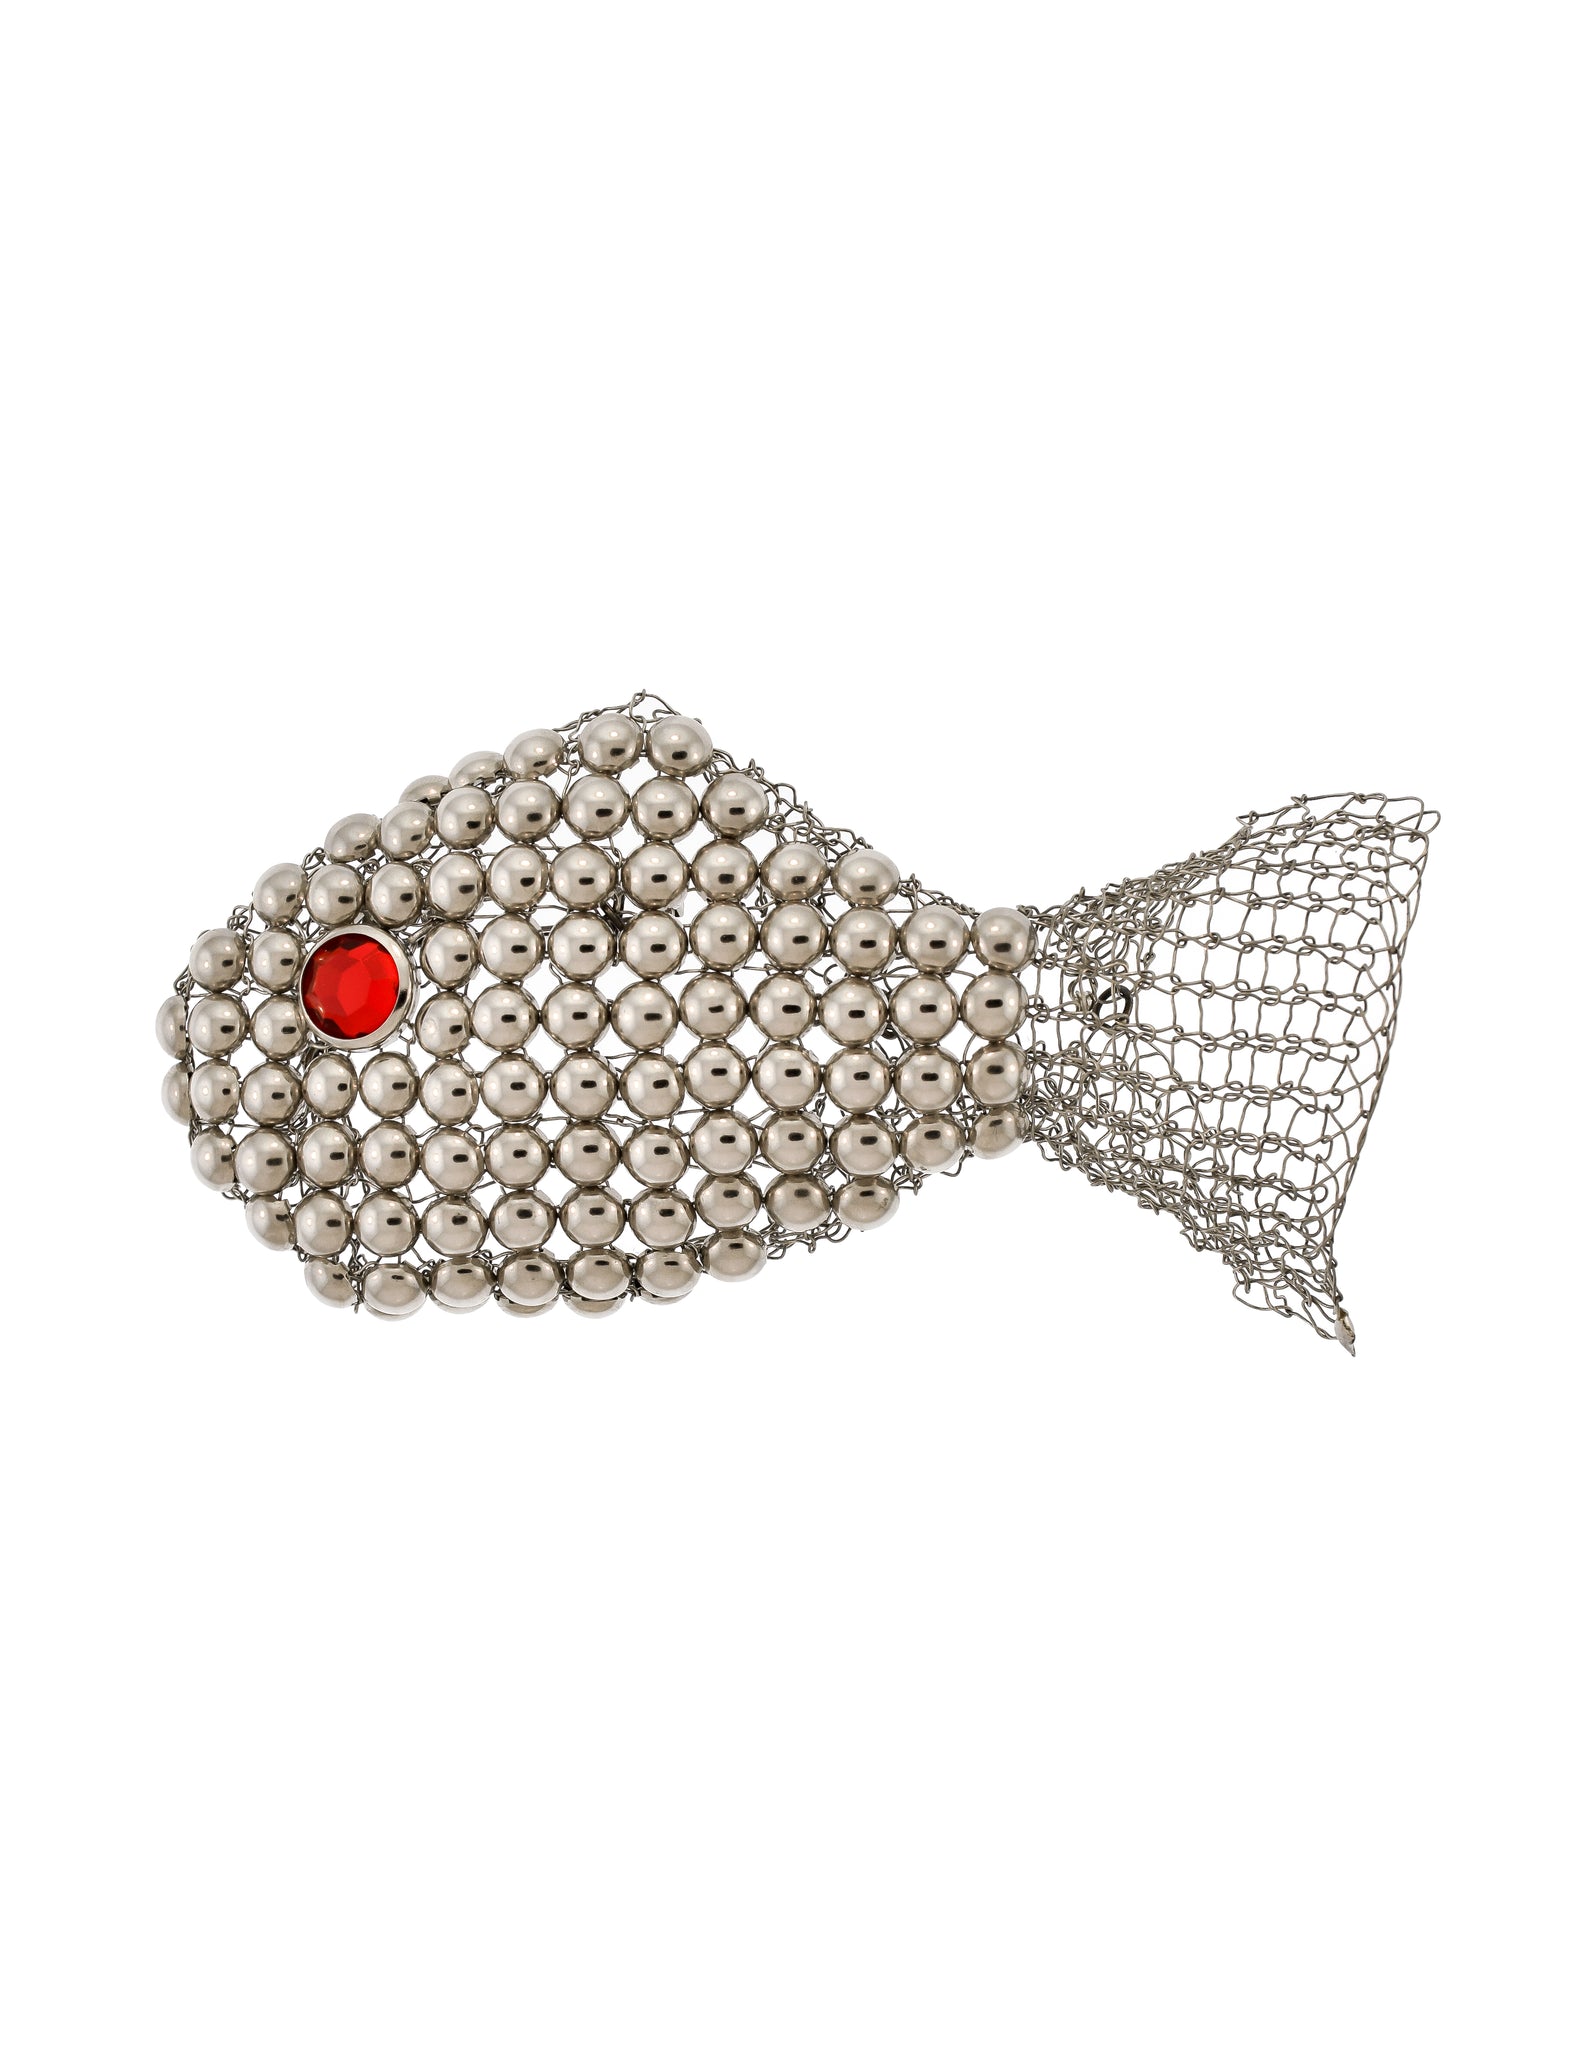 Vintage Artisan Silver Woven Wire Ball Stud Embellished Red Rhinestone Fish Brooch Pin